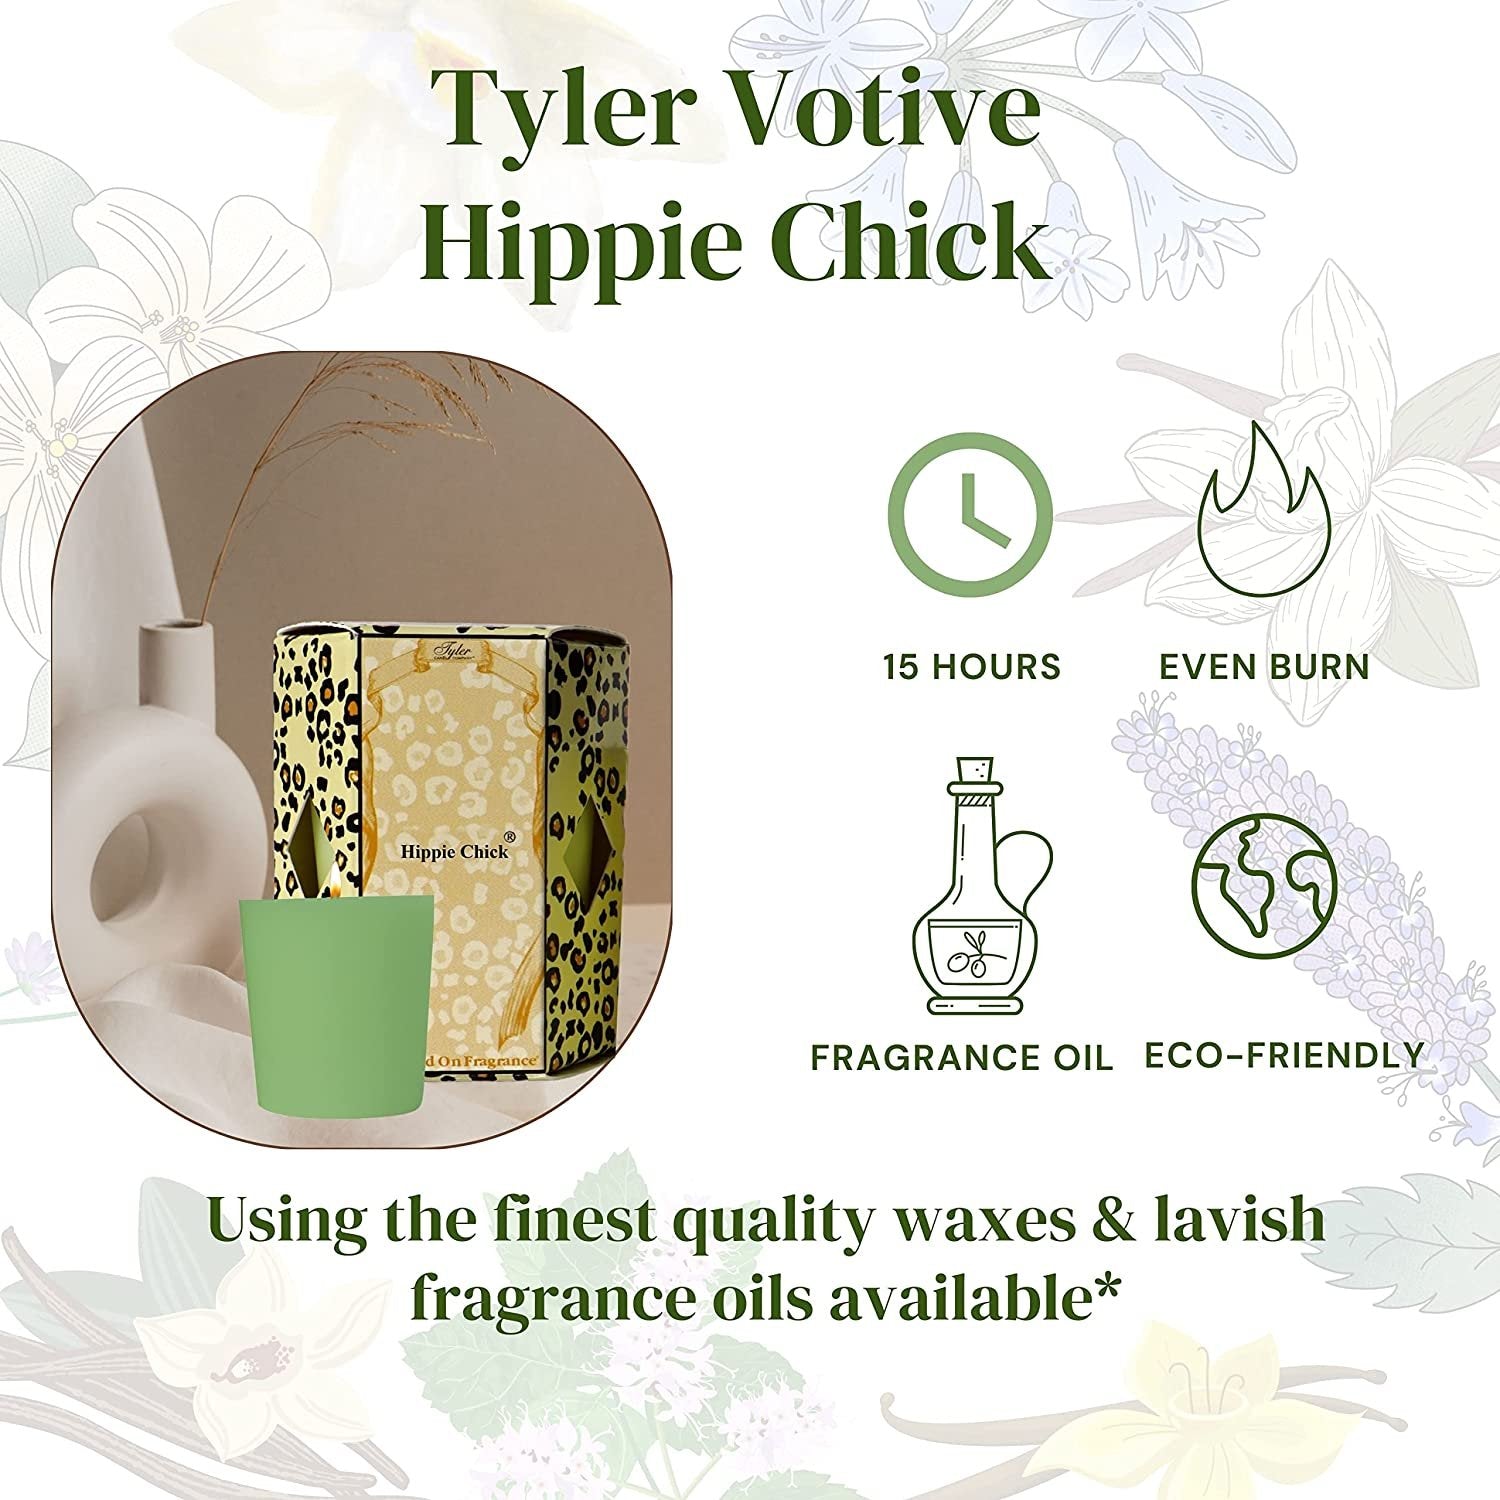 Tyler Candle Company Hippie Chick Votive Candles - Luxury Scented Candle with Essential Oils - 16 Pack of 2 oz Small Candles with 15 Hour Burn Time Each - with Bonus Key Chain